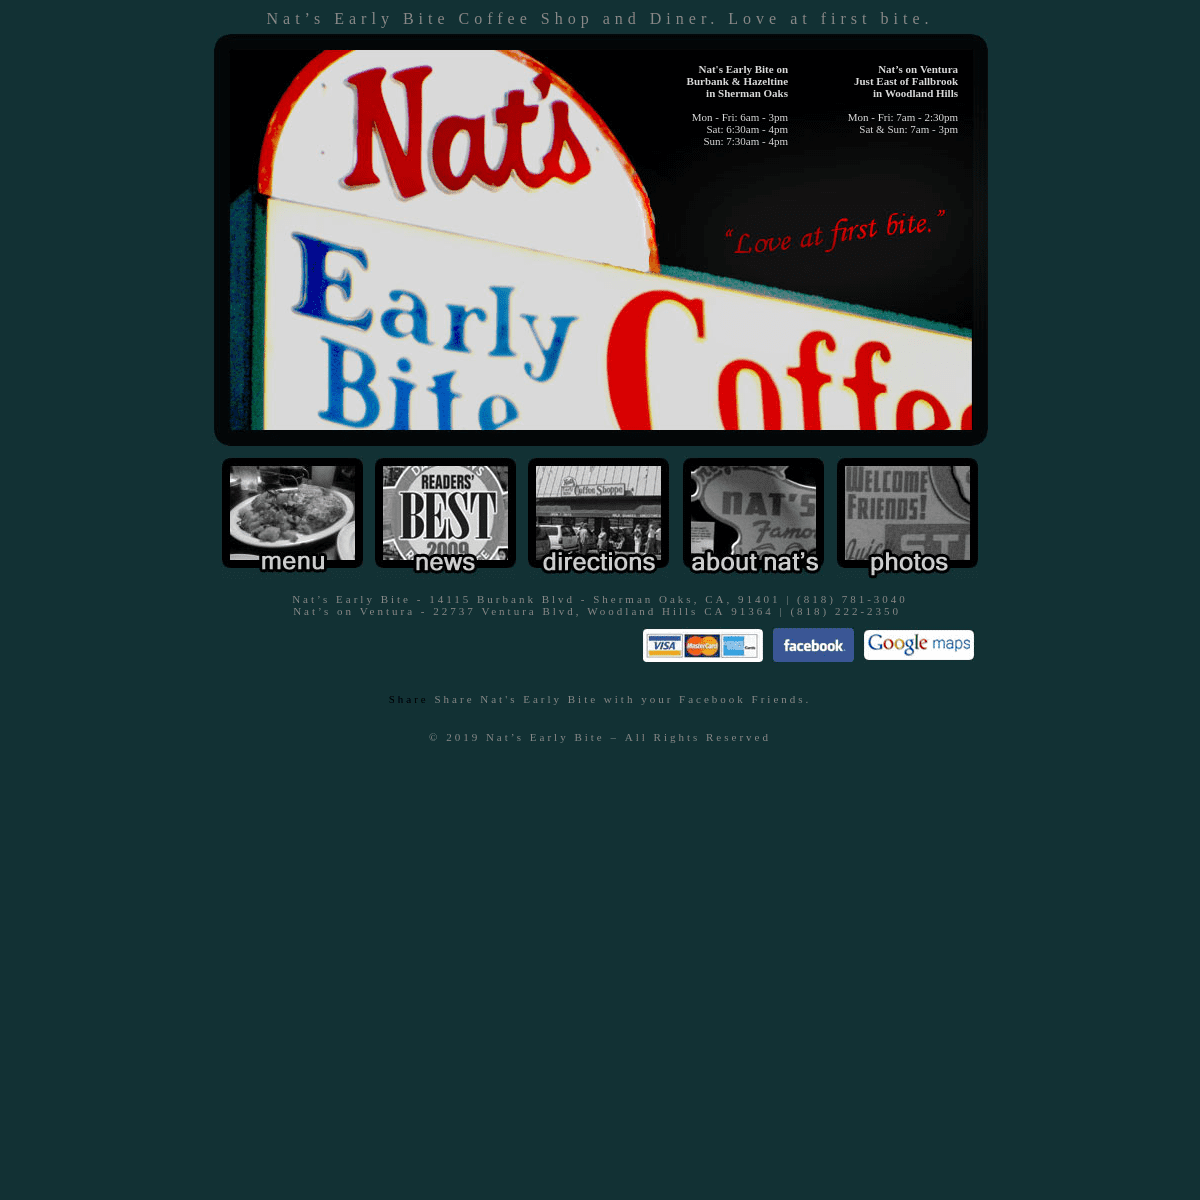 Nat's Early Bite Coffee Shop | Breakfast and Lunch Diner